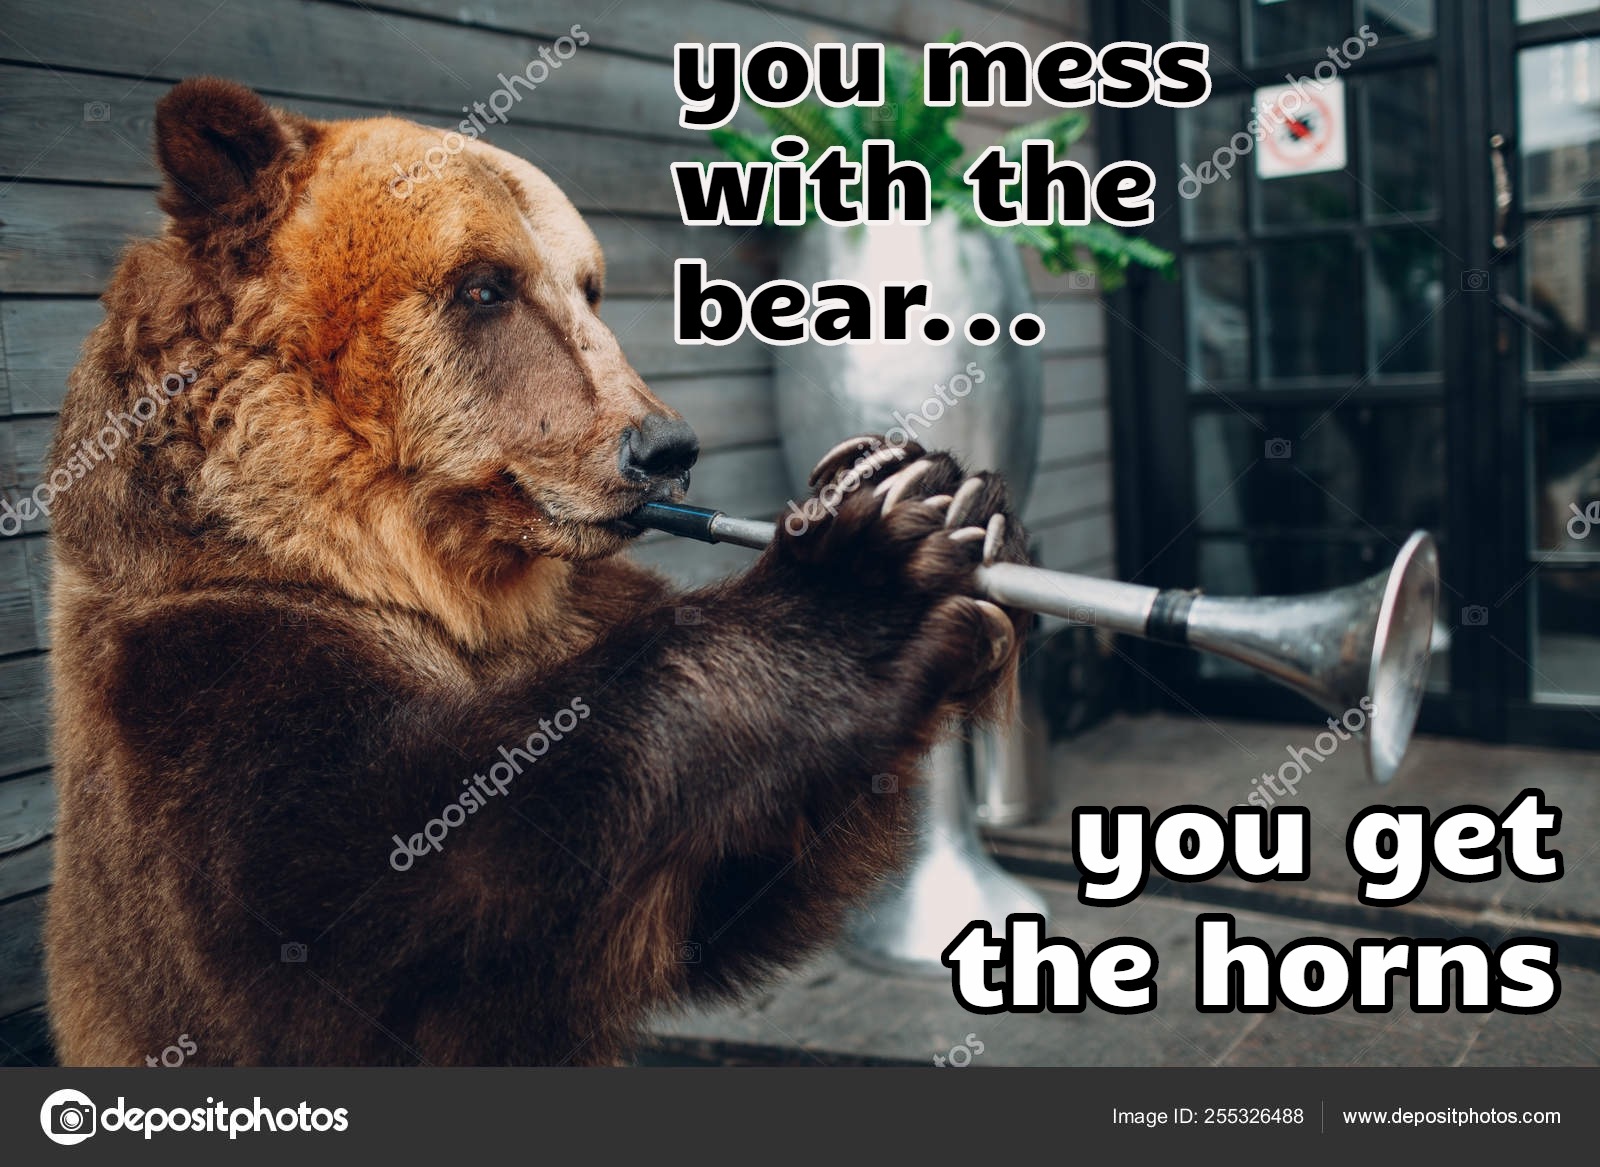 photo caption - ok positphotos you mess with the bear... zpose otos hotos depositphotos itphotos depositphotos you get the horns Os depositphotos Image Id 256326488